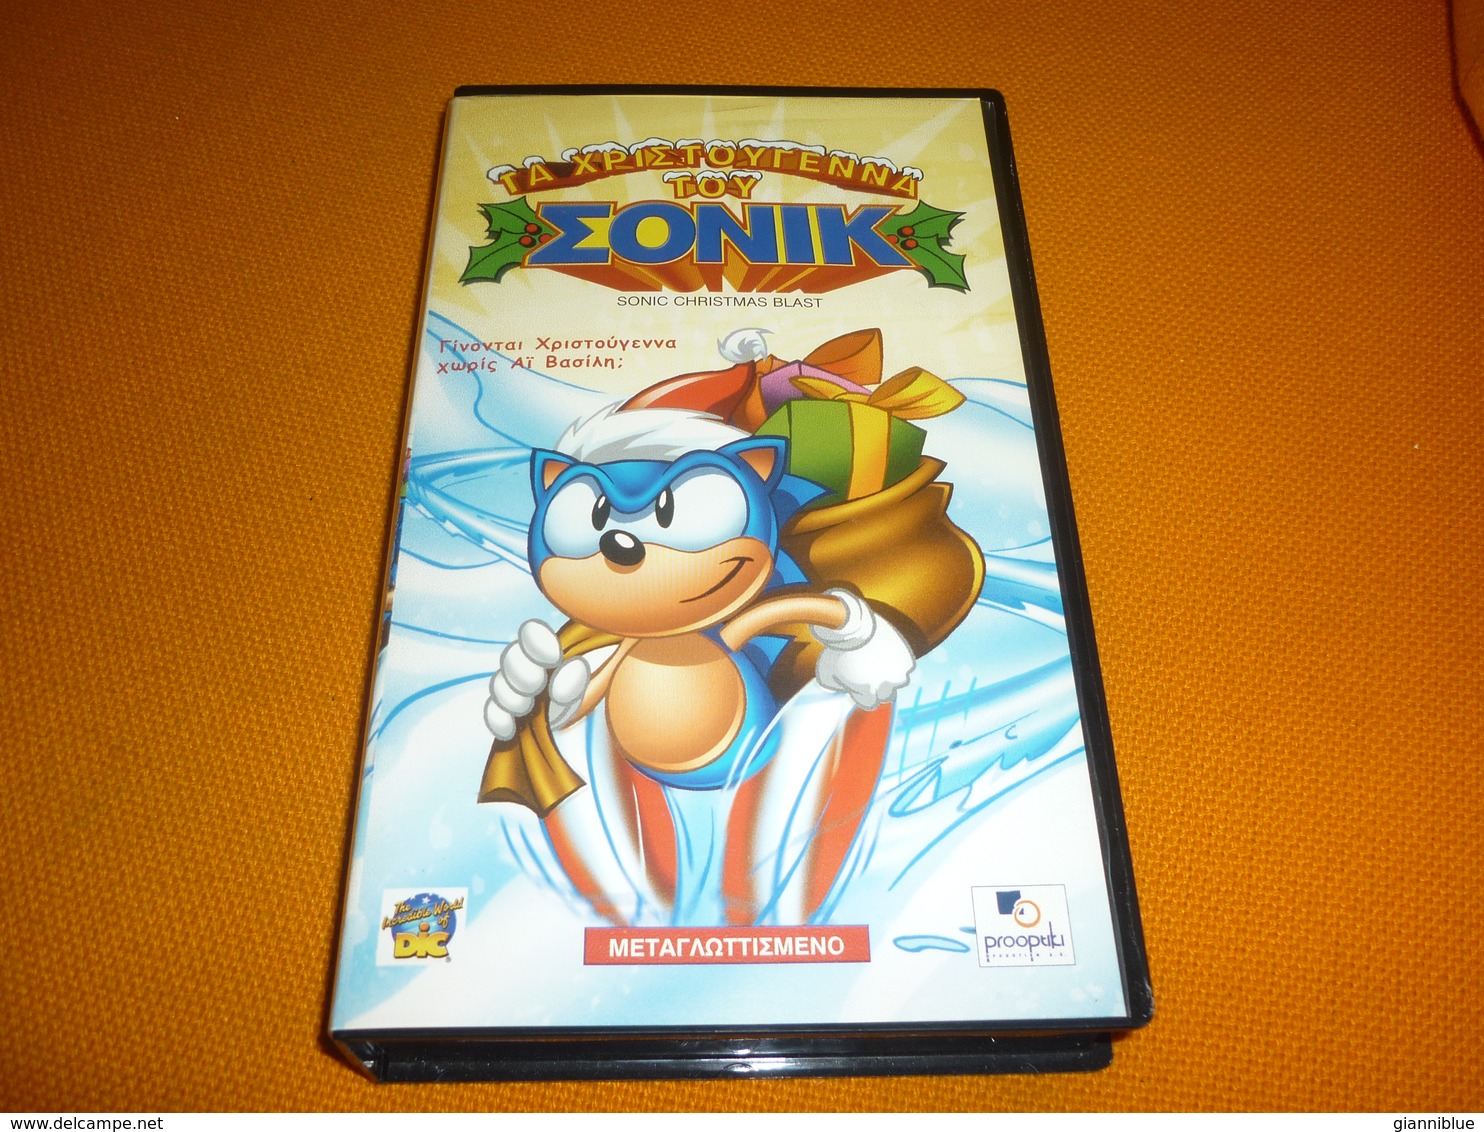 Sonic The Hedgehog Old Greek Vhs Cassette Video Tape From Greece - Animatie